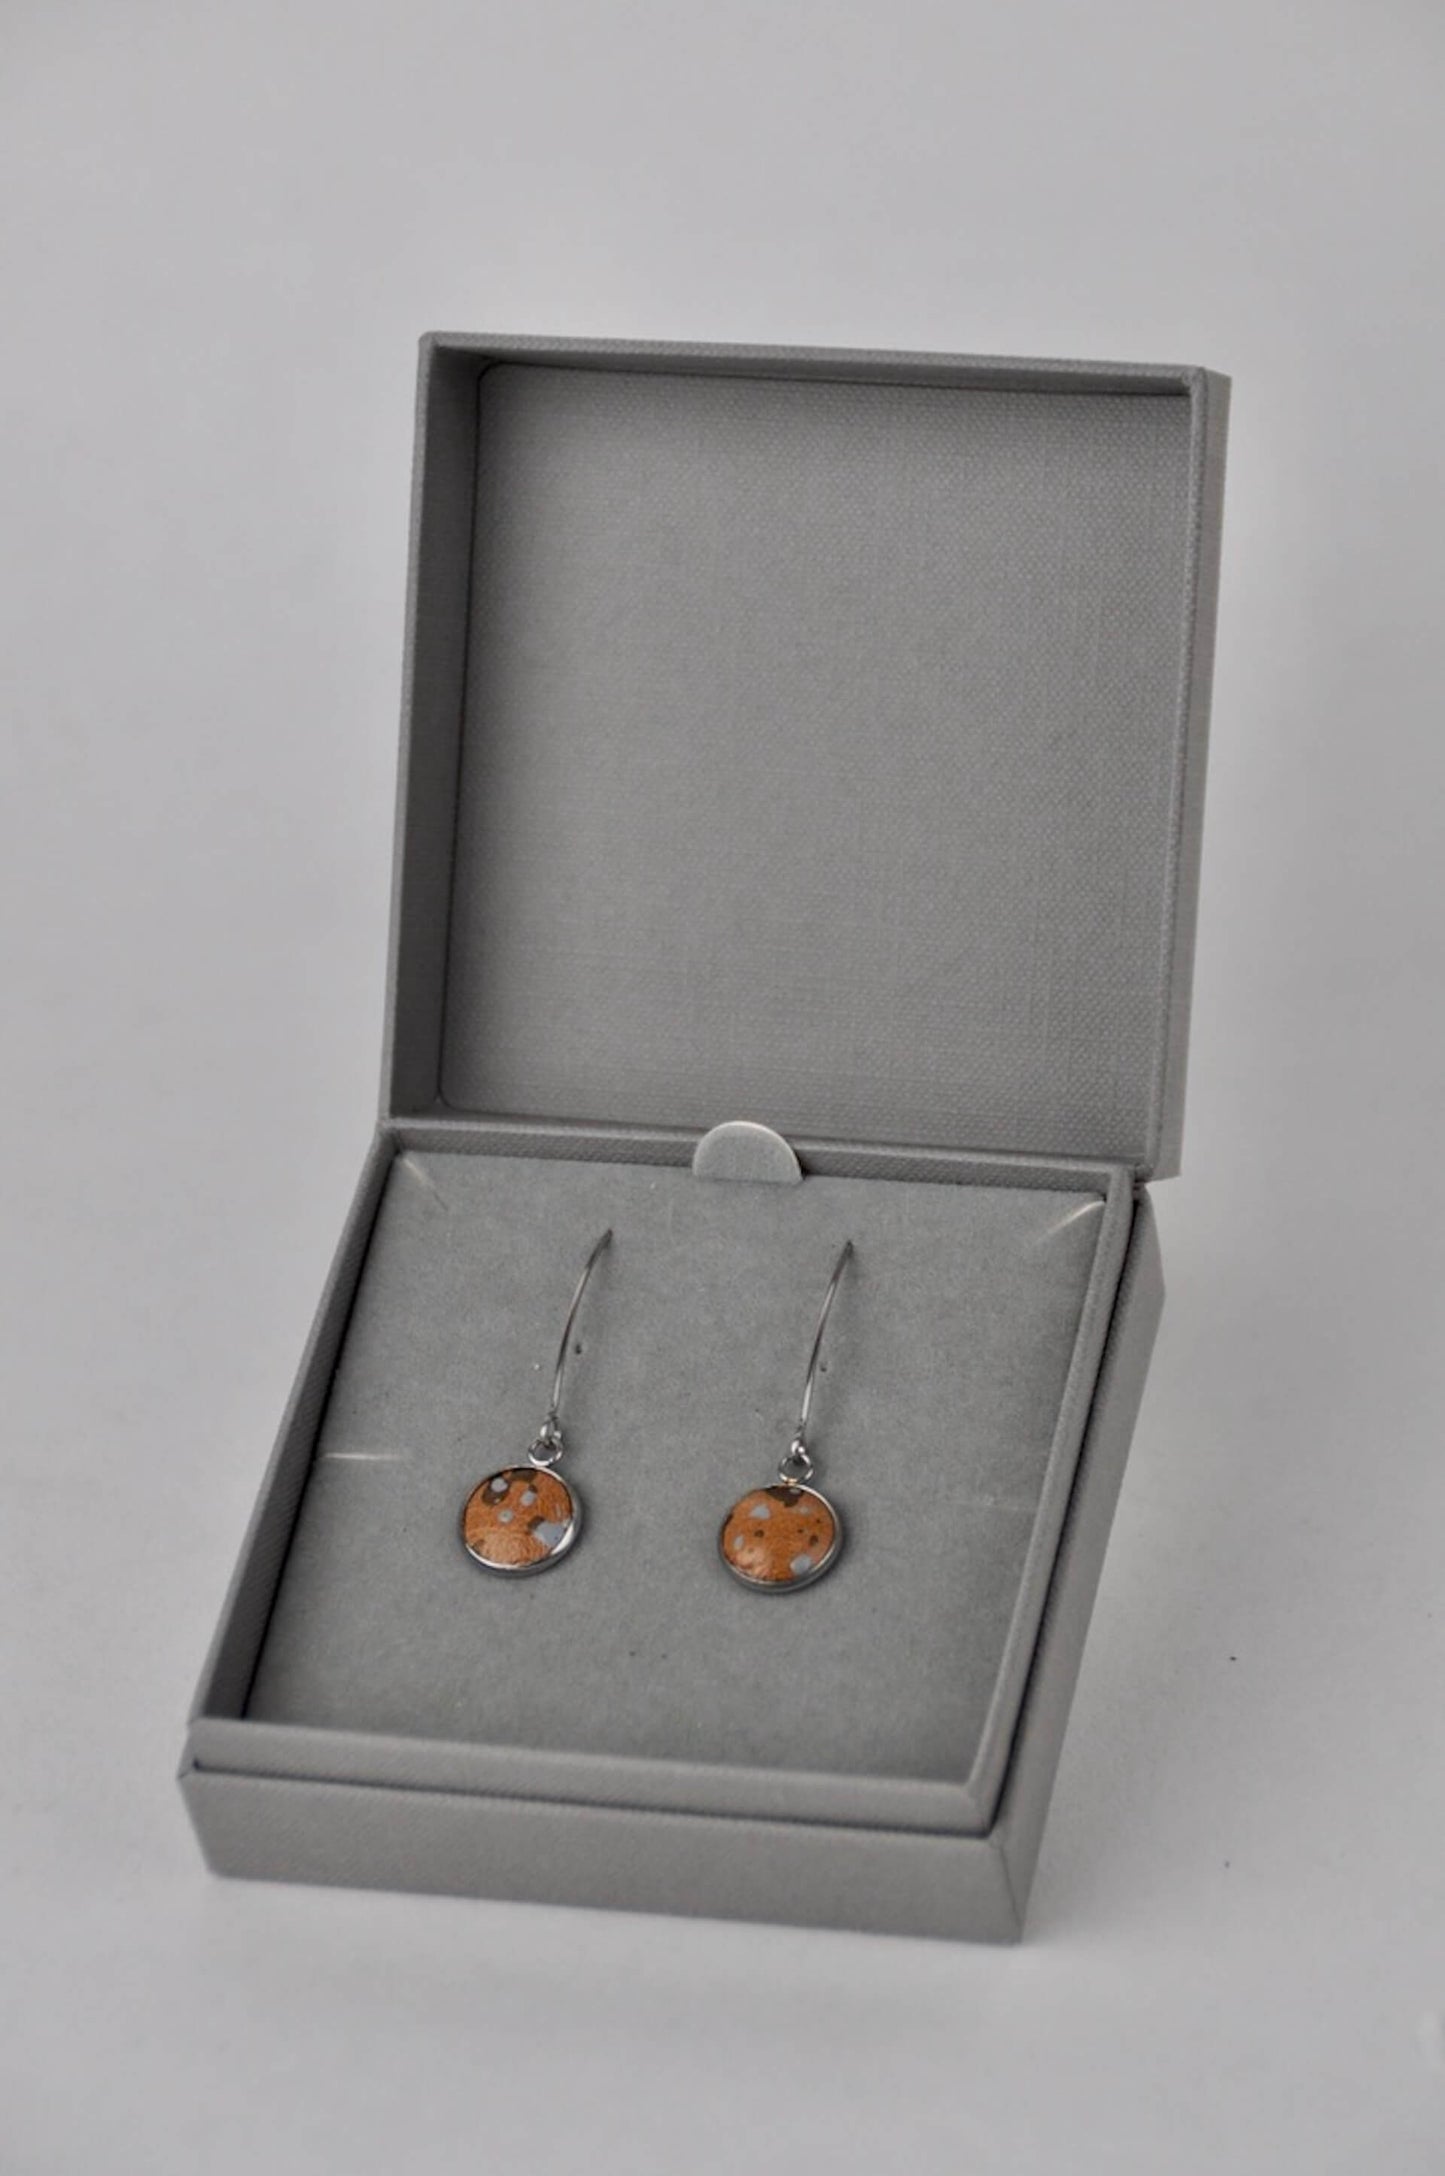 Bex & Bolt Earrings Tan Leather with Metallic Bronze & Grey Flecks Stainless Steel V Shape Drops with Gift Box (multiple colours)